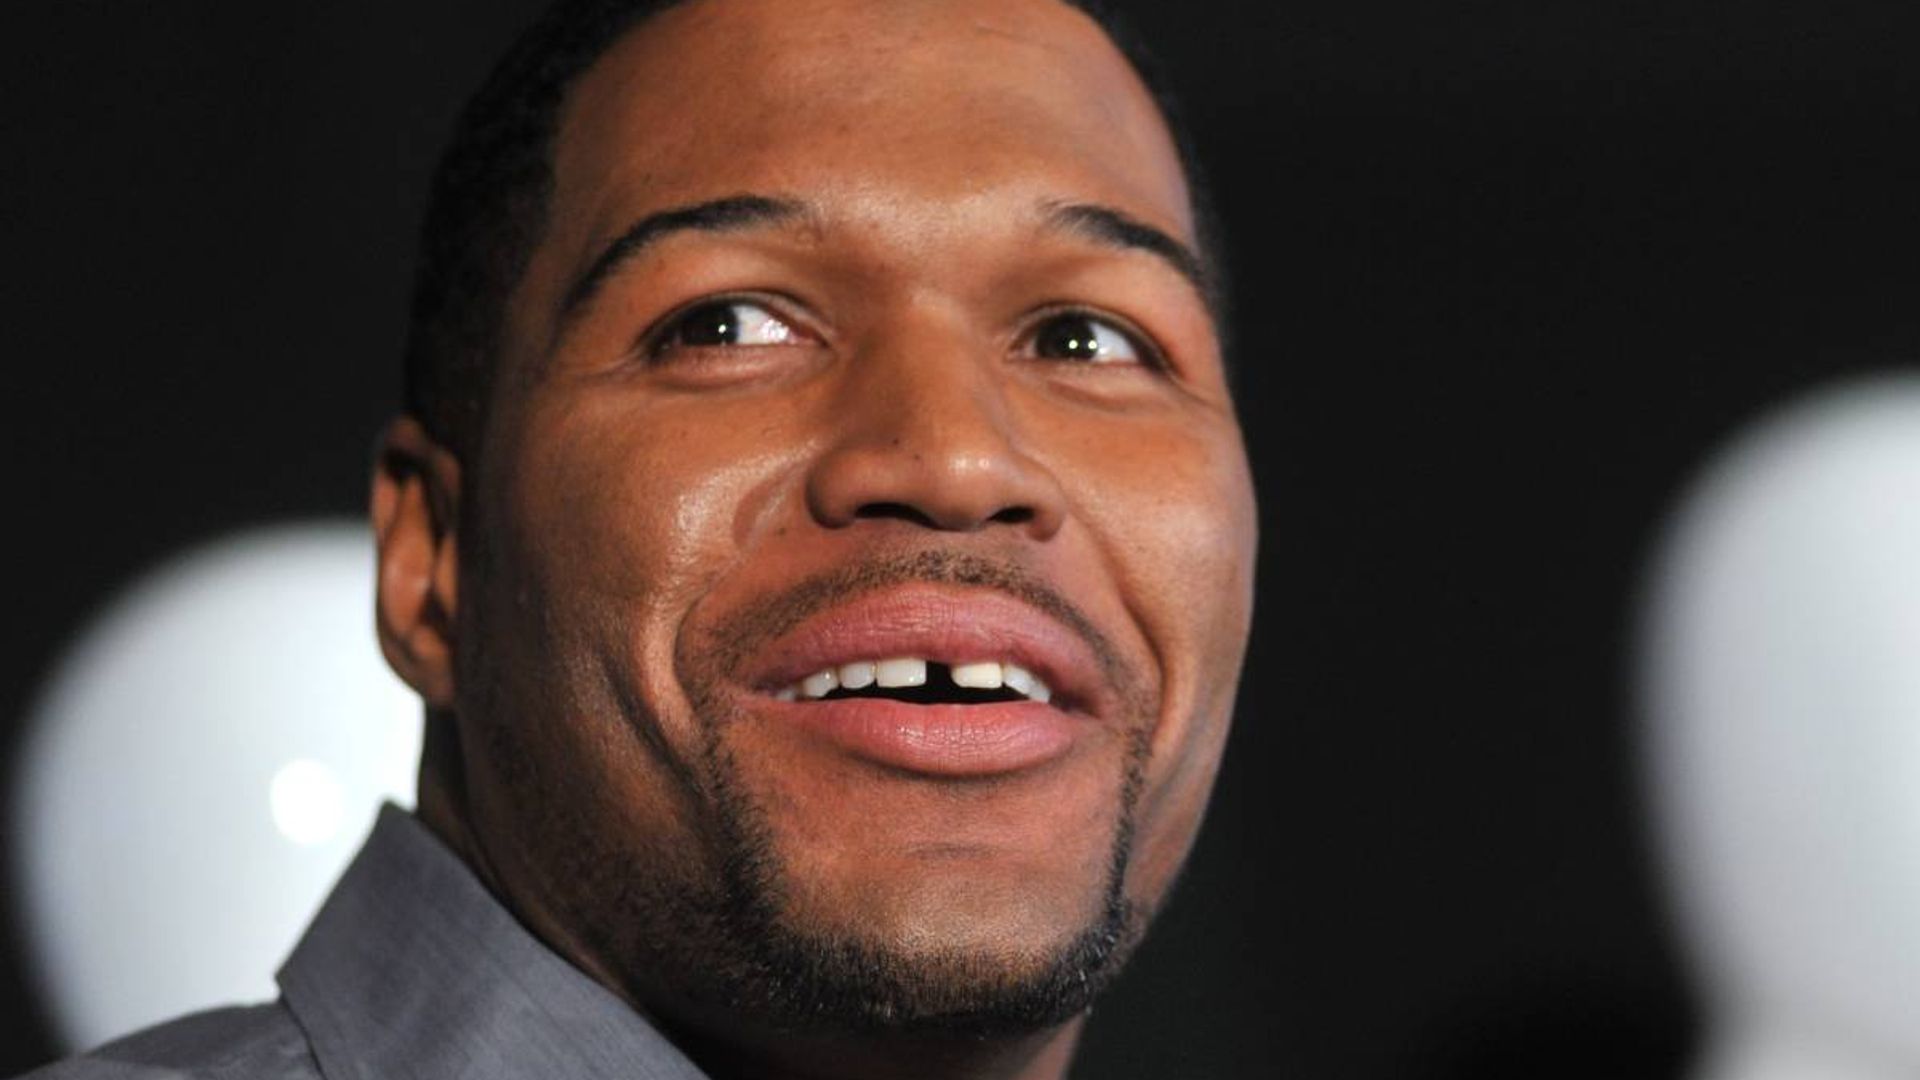 Michael Strahan praises ex-wife in heartfelt post about their daughter